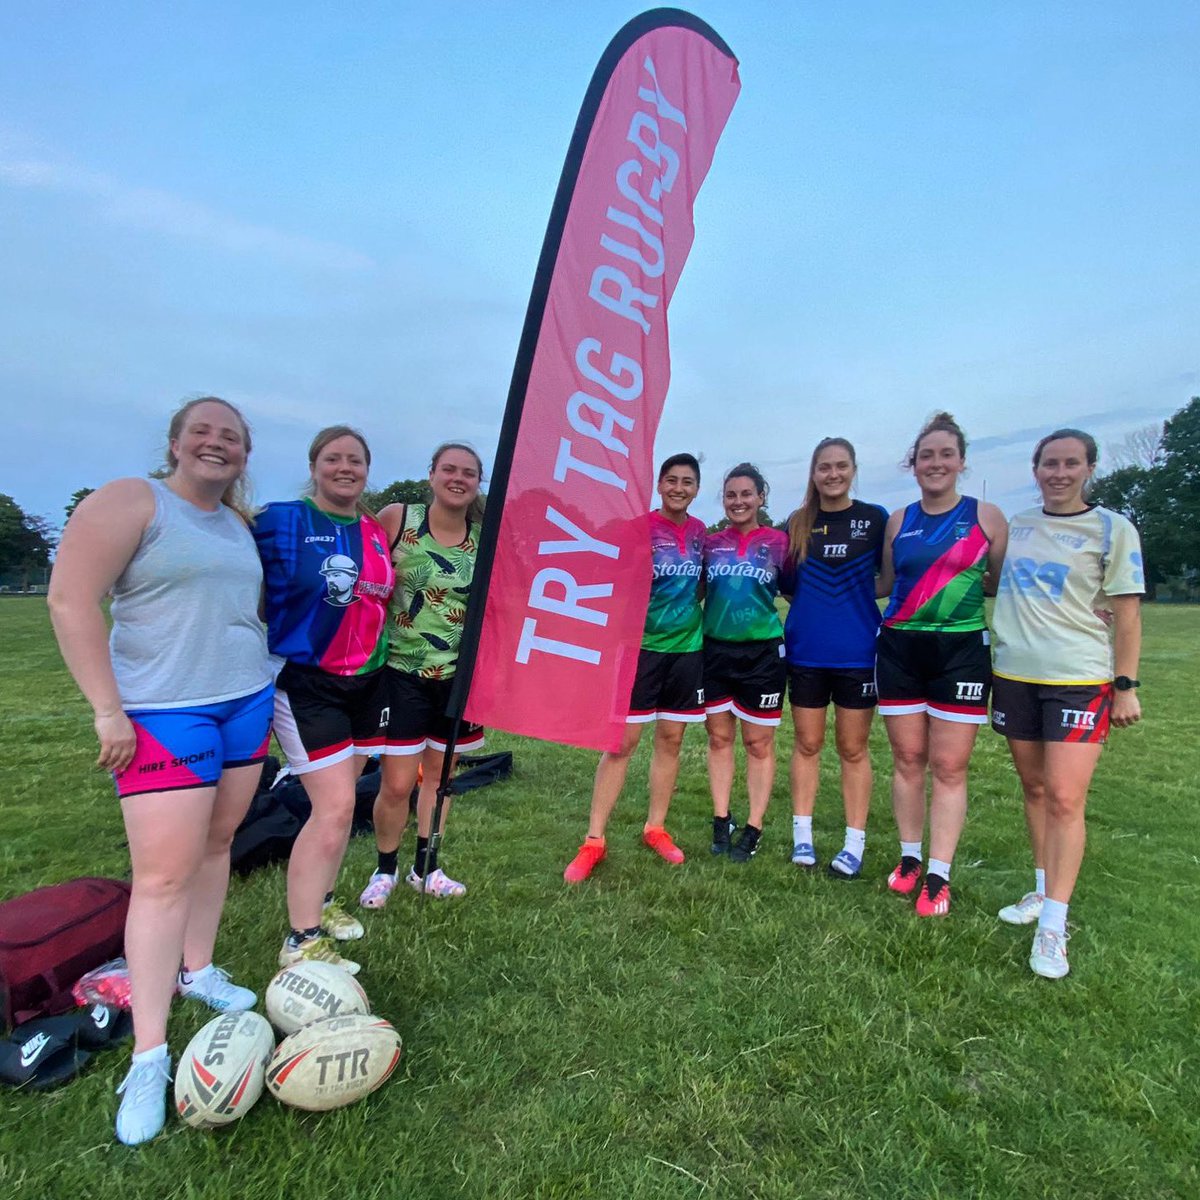 Congratulations to our Tag Rugby team who finished up the season in 3rd place in the @TryTagThamesVal league. Thank you to our own GB Tag Sarah Jeffrey for coordinating, & to @TryTagRugbyUK for the coaching (& patience!) #tagrugby #rugby #offseason #trysomethingnew #rdguk